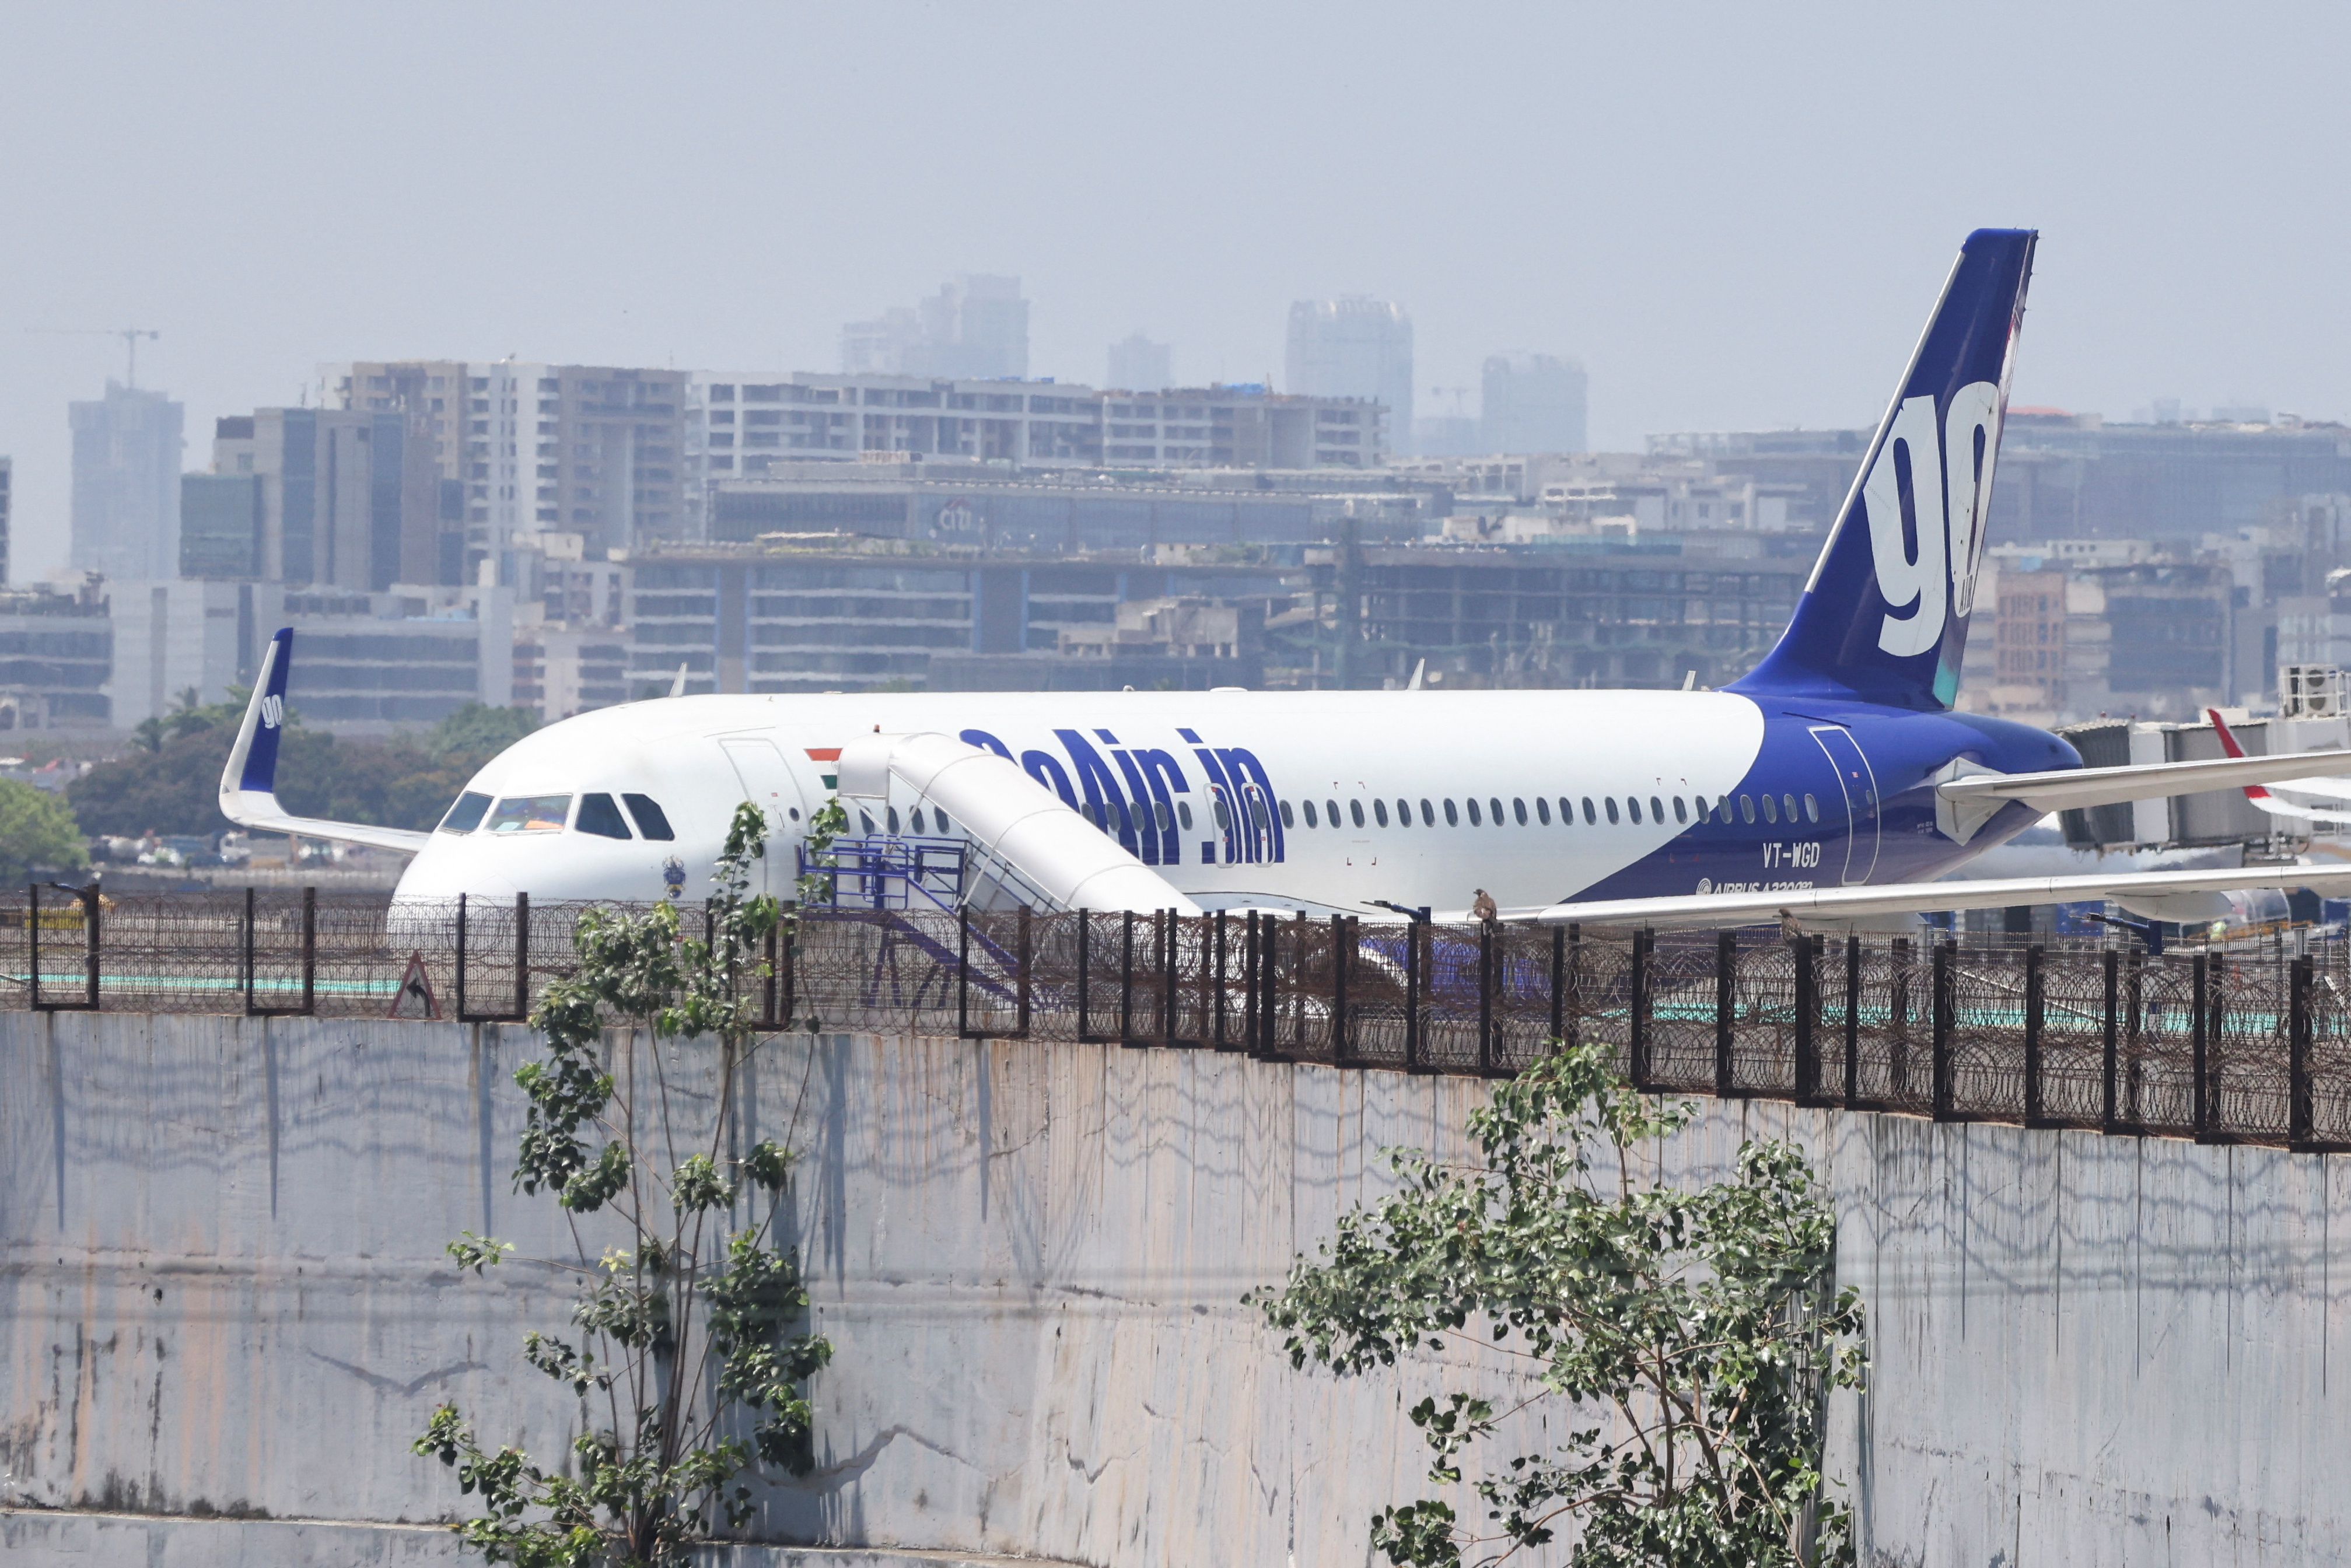 A Go First airline, formerly known as GoAir, passenger aircraft is parked at the Chhatrapati Shivaji International Airport in Mumbai